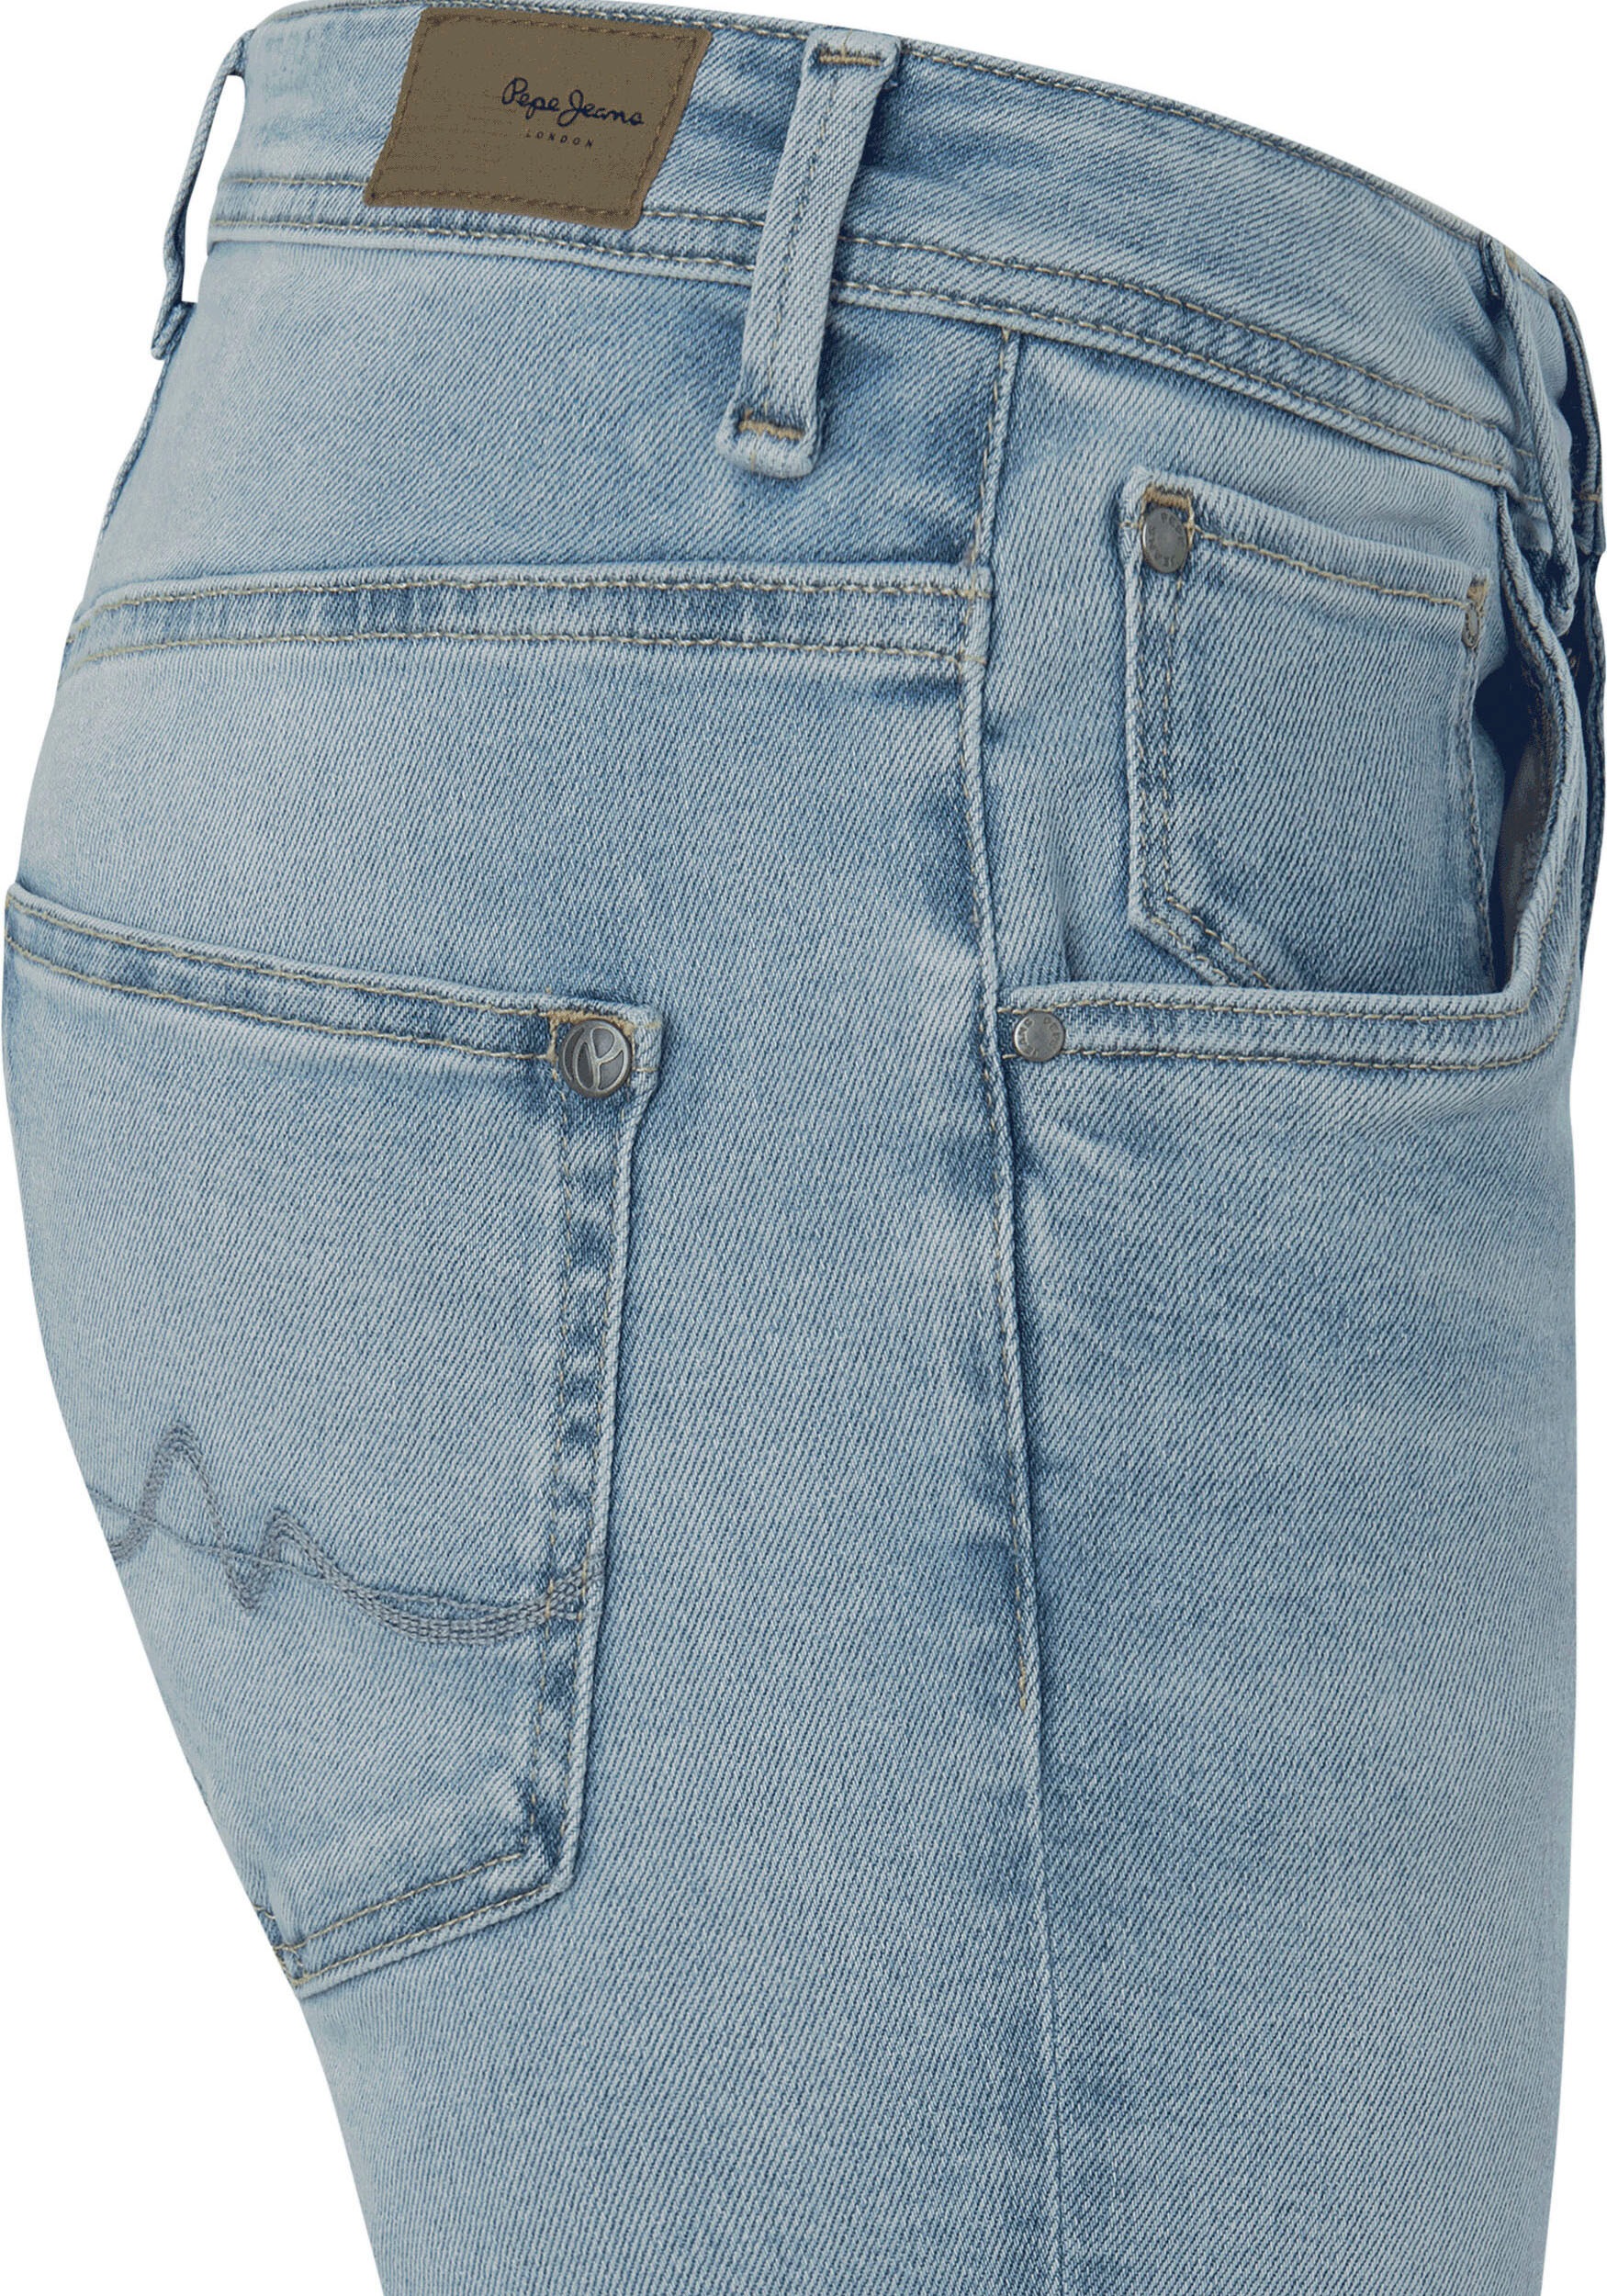 Pepe Jeans bestellen Relax-fit-Jeans bei OTTO »VIOLET« online